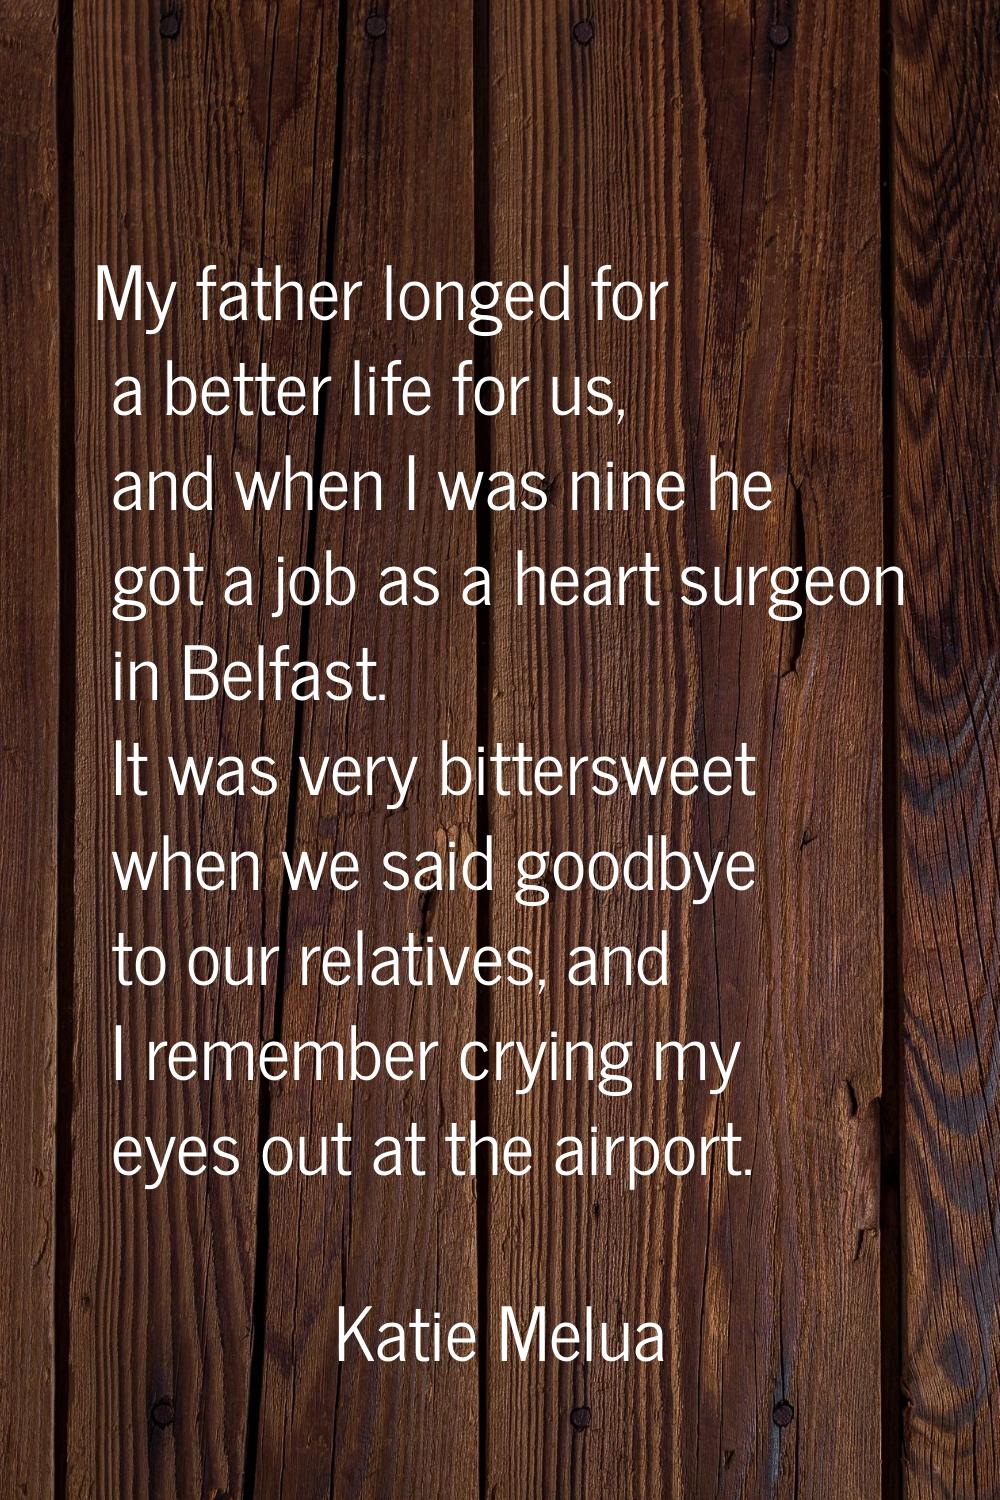 My father longed for a better life for us, and when I was nine he got a job as a heart surgeon in B